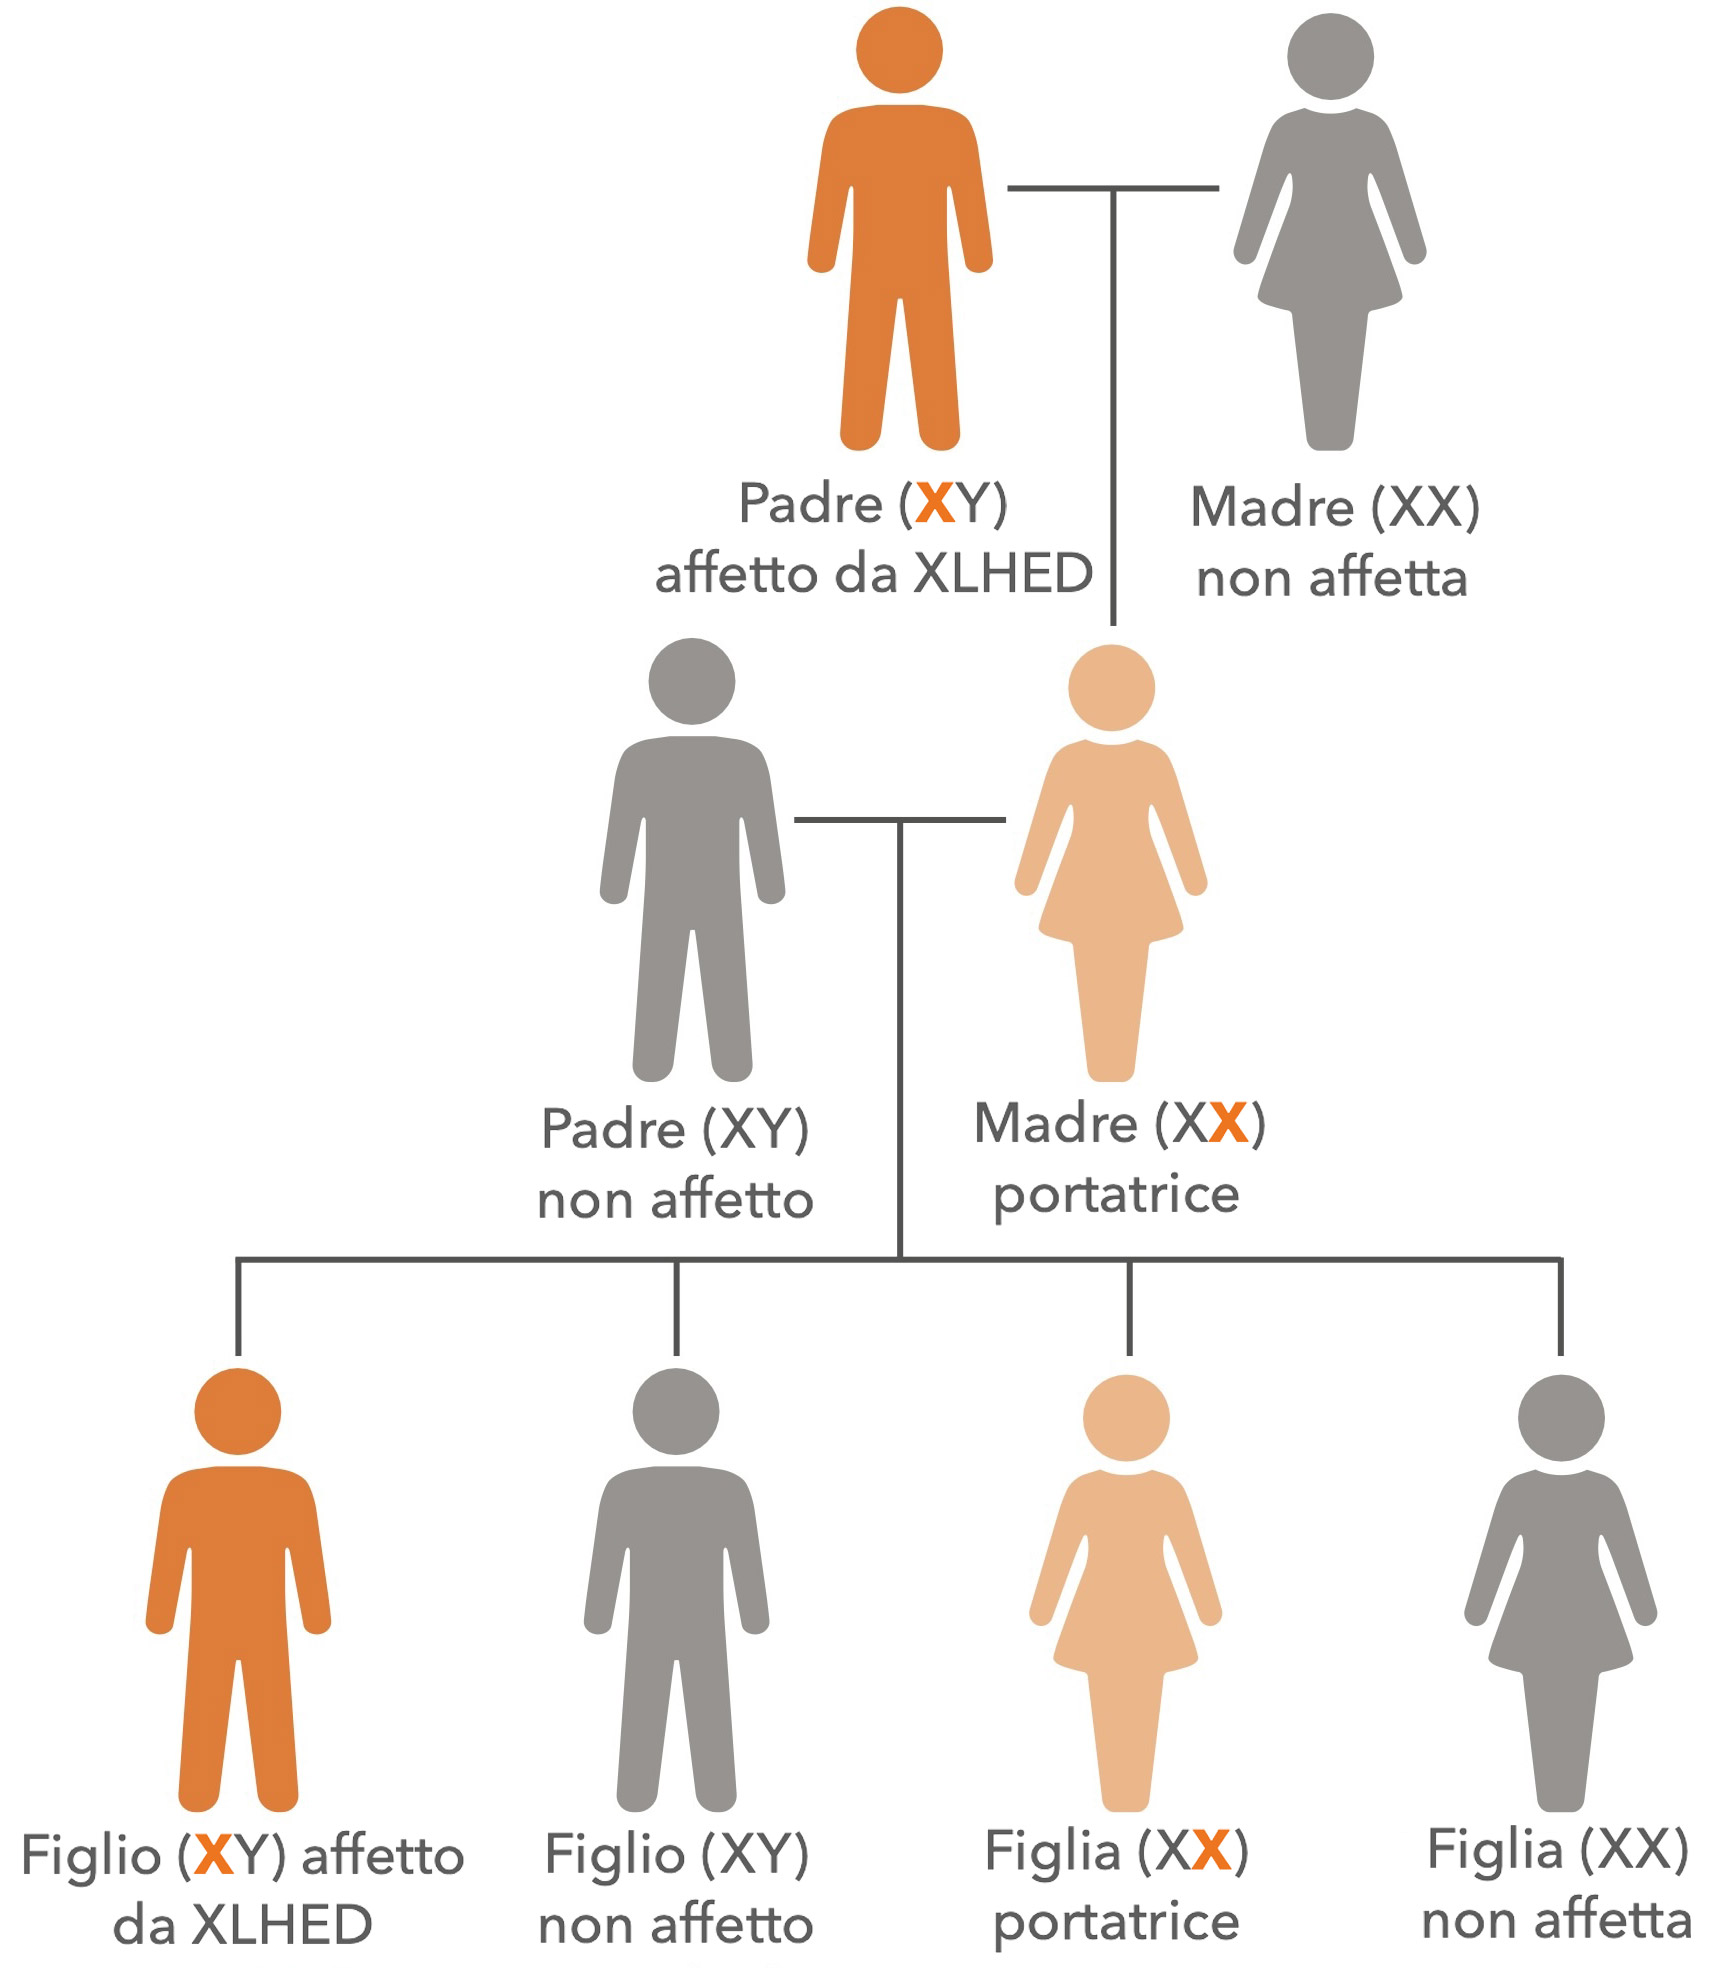 Graphic about the inheritance of the most common form of Ectodermal Dysplasia, XLHED